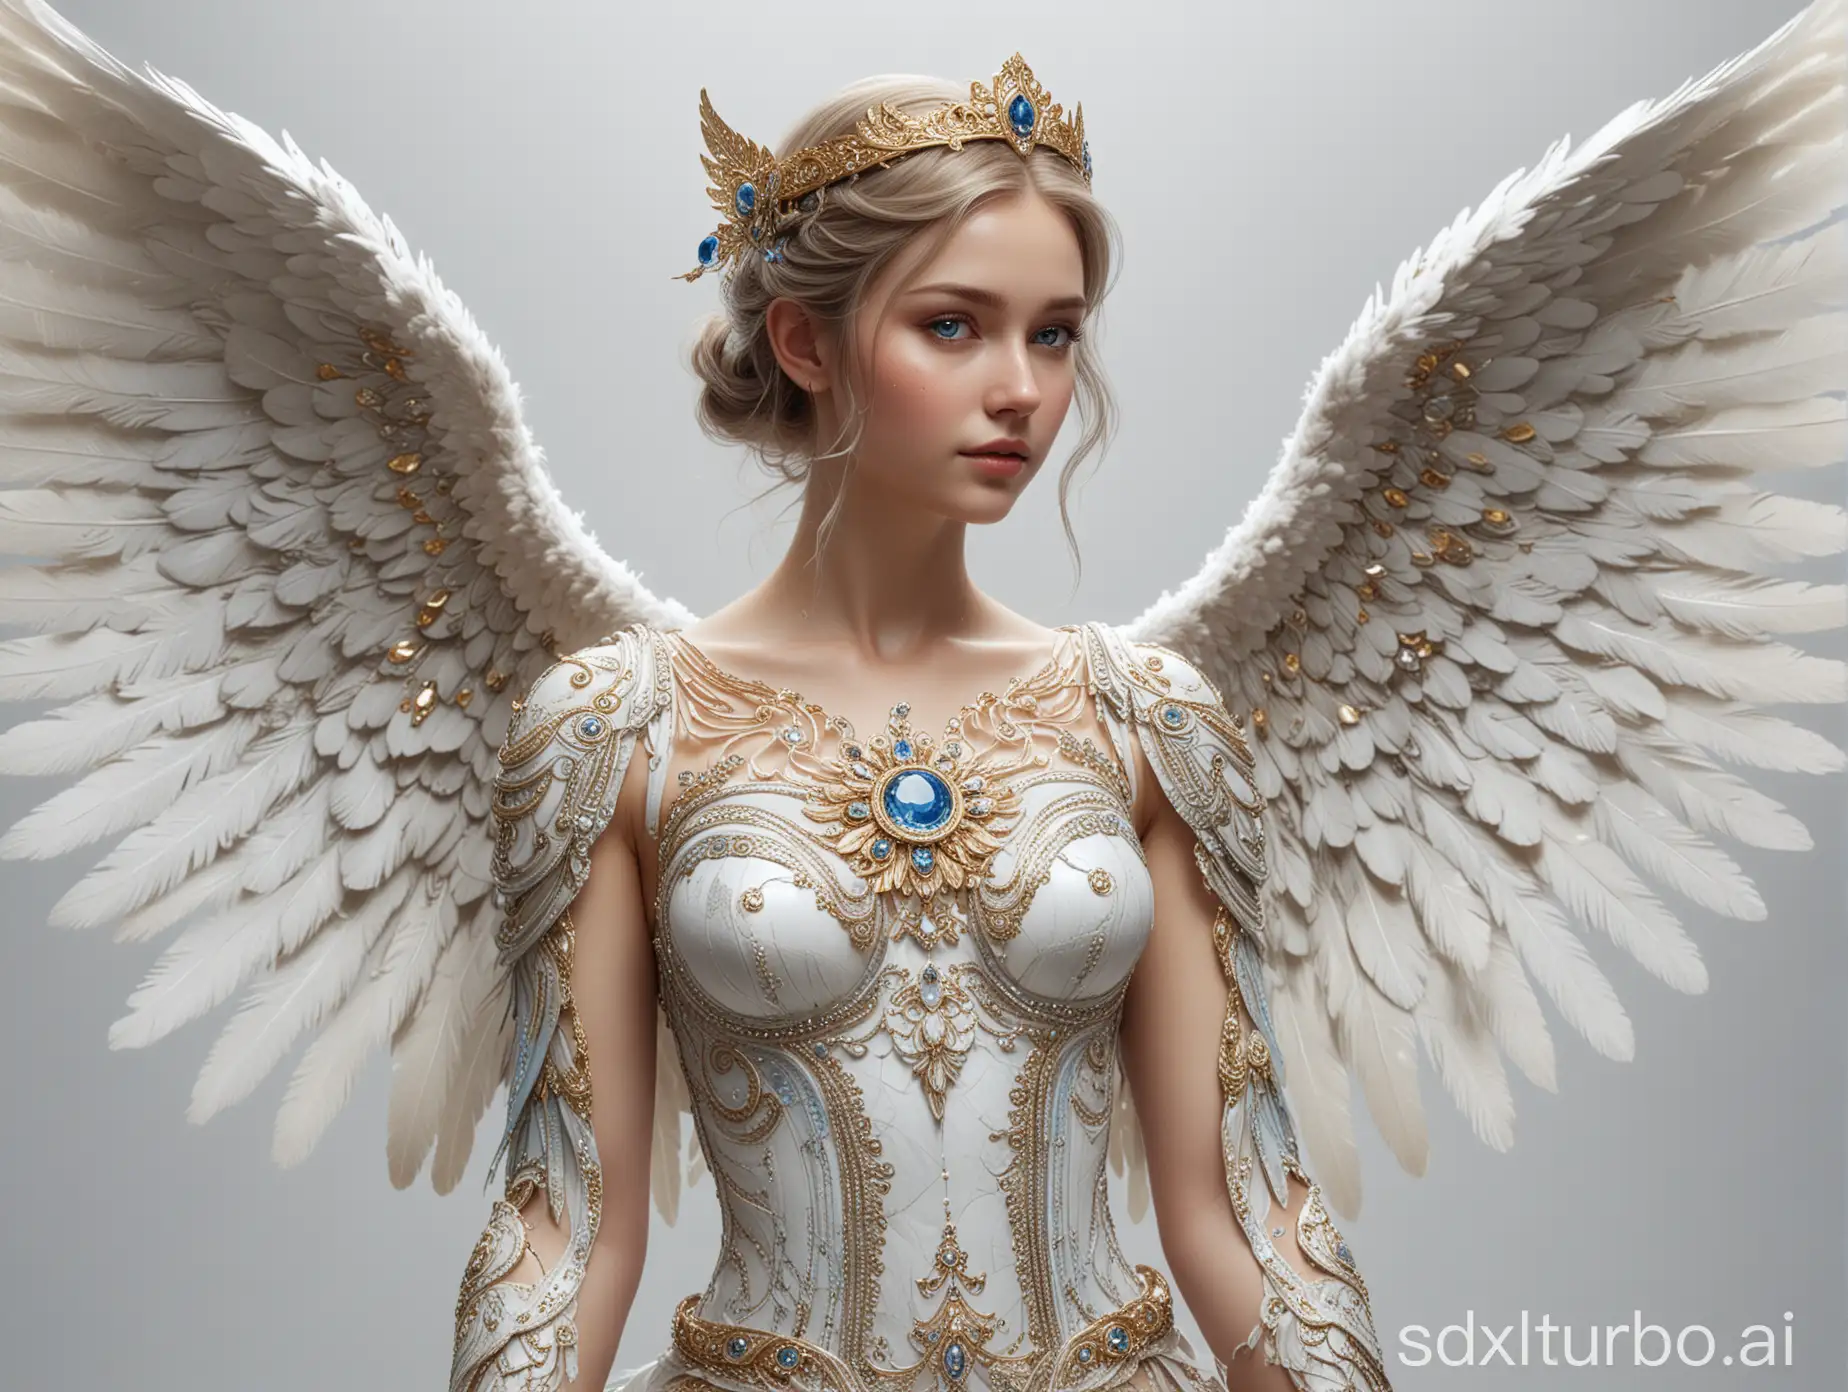 RAW Photo of a detailed magnificent angel with wings  in a full-body long shot from 15-meter distance with clean hands & fingers putting high hills shoes & shining gems on wings tips from a distance that full body and wings are visible, with sharp focus , clear big blue catchy eyes, detailed face and skin texture,wings outstretched with gold & silver tips and gold silver & blue
 feathers, intricate ornate marble, and bone interwoven and spiraling patterns, final fantasy style,super beautiful ggoddess wearing translucent  great at both photos and artistic feathered 8k, high resolution, detailed, realistic lighting, focus on hands/face, painterly, strong composition, award-winning with simple white background